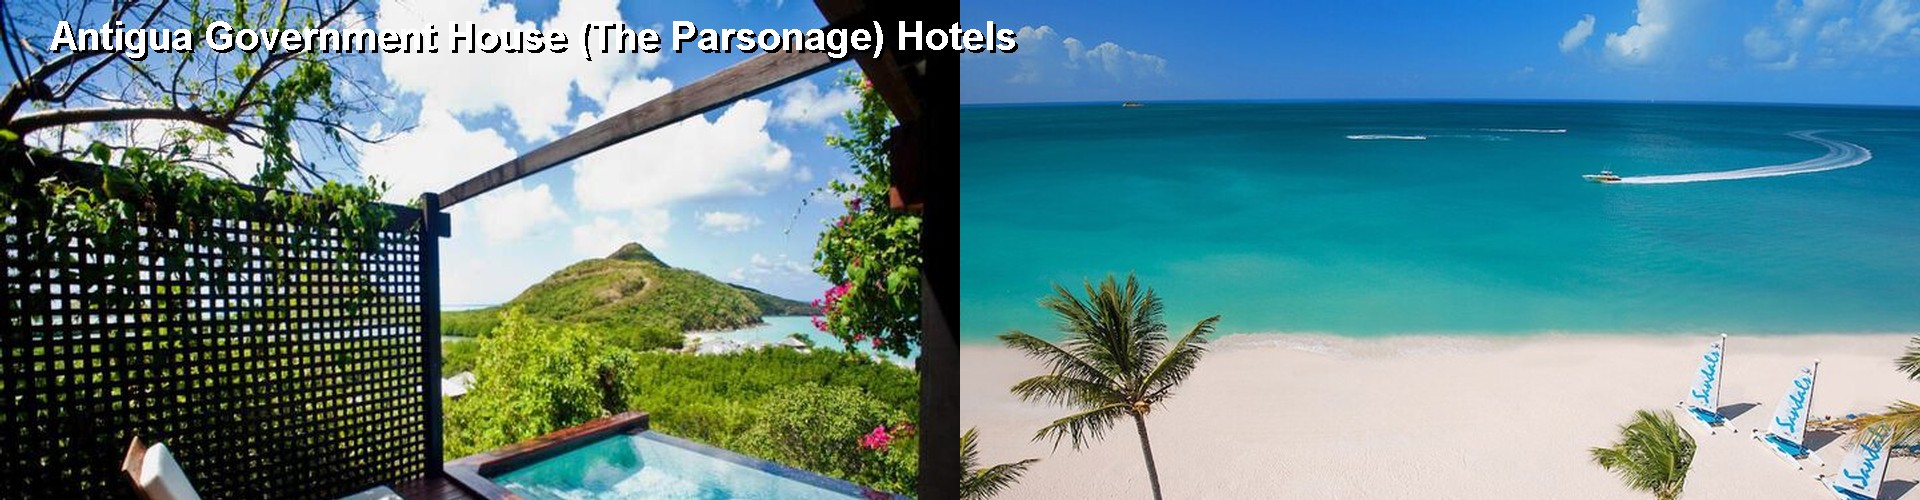 5 Best Hotels near Antigua Government House (The Parsonage)